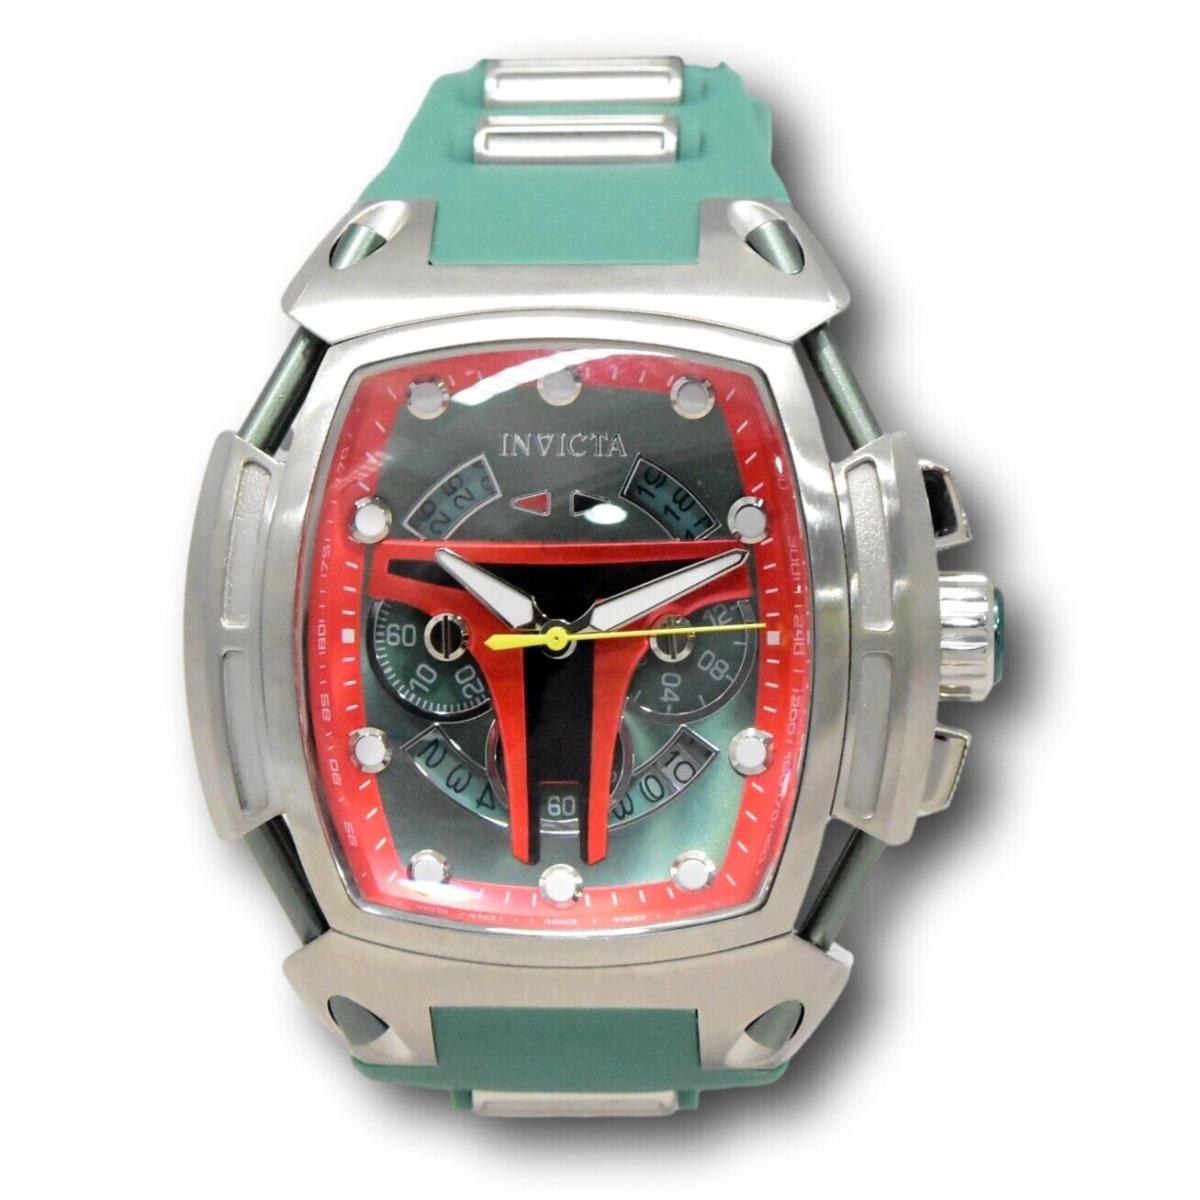 Invicta watch Diablo - Dial: Green and Red and Black, Band: